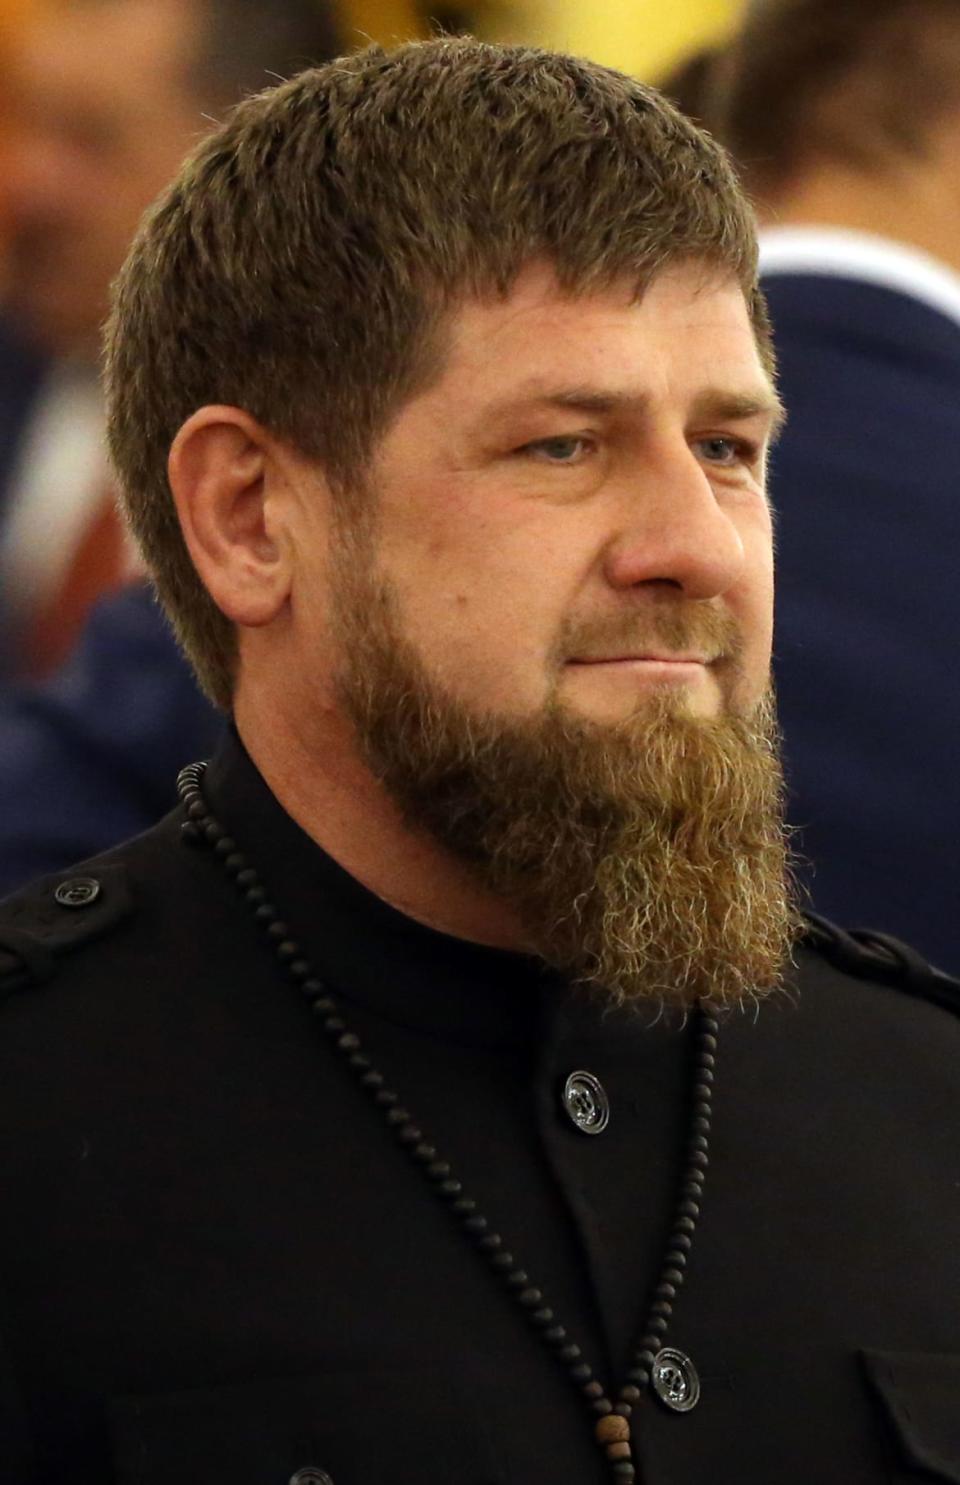 <div class="inline-image__caption"><p>Chechen President Ramzan Kadyrov enters the hall during the meeting of State Council at the Grand Kremlin Palace, in Moscow, Russia, June 26,2019. </p></div> <div class="inline-image__credit">Mikhail Svetlov/Getty</div>